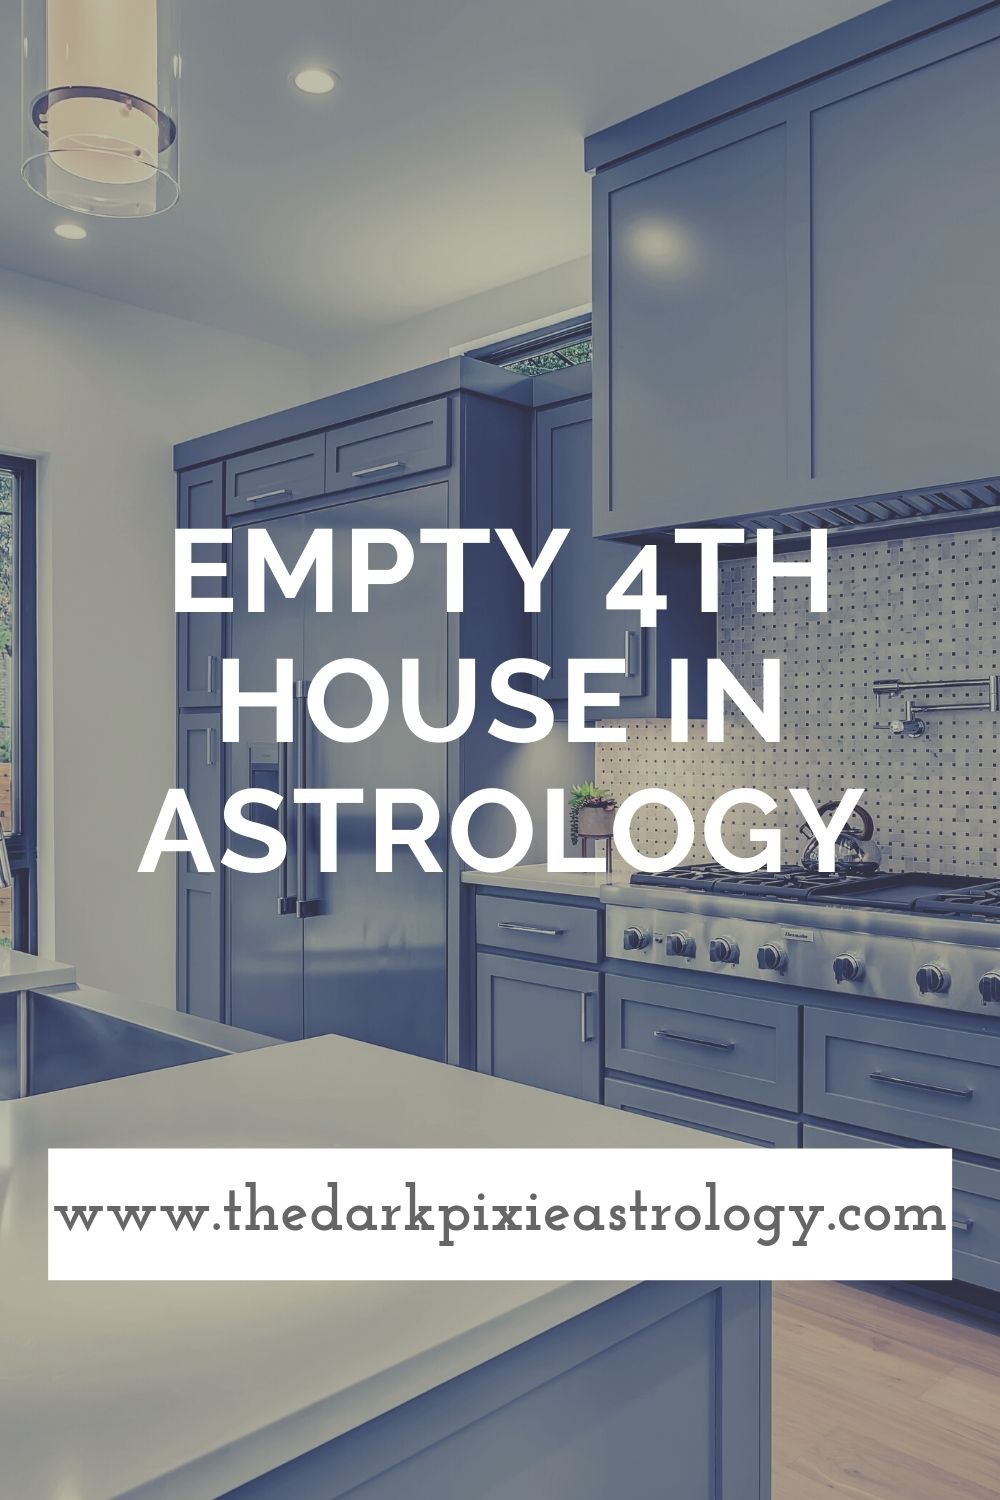 Empty 4th House in Astrology - The Dark Pixie Astrology